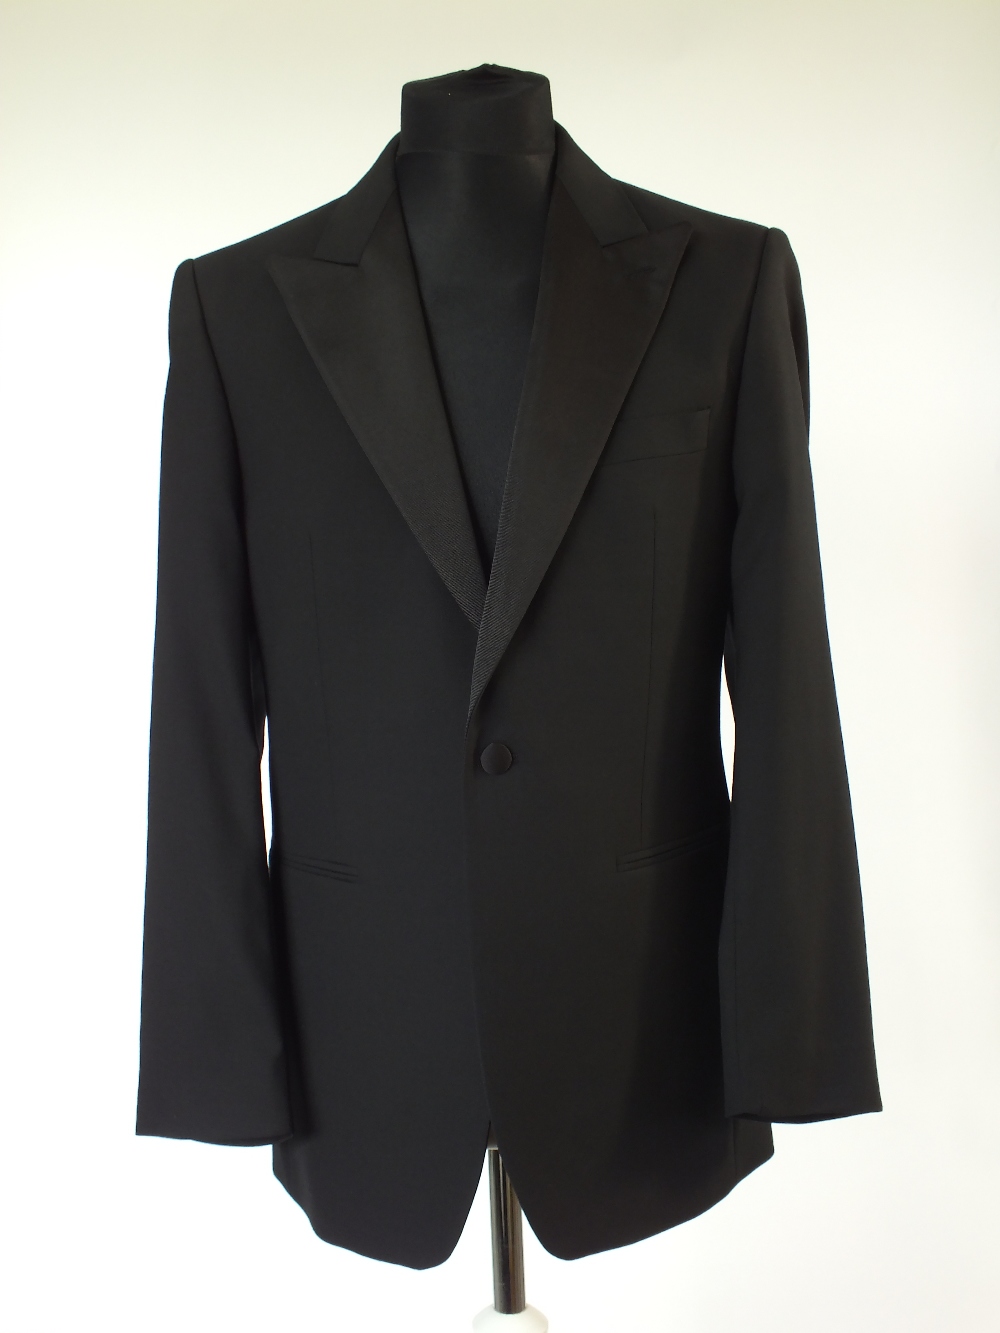 A Charles Tyrwhitt dinner suit, satin twill lower lapel, satin twill detailing, flat front to